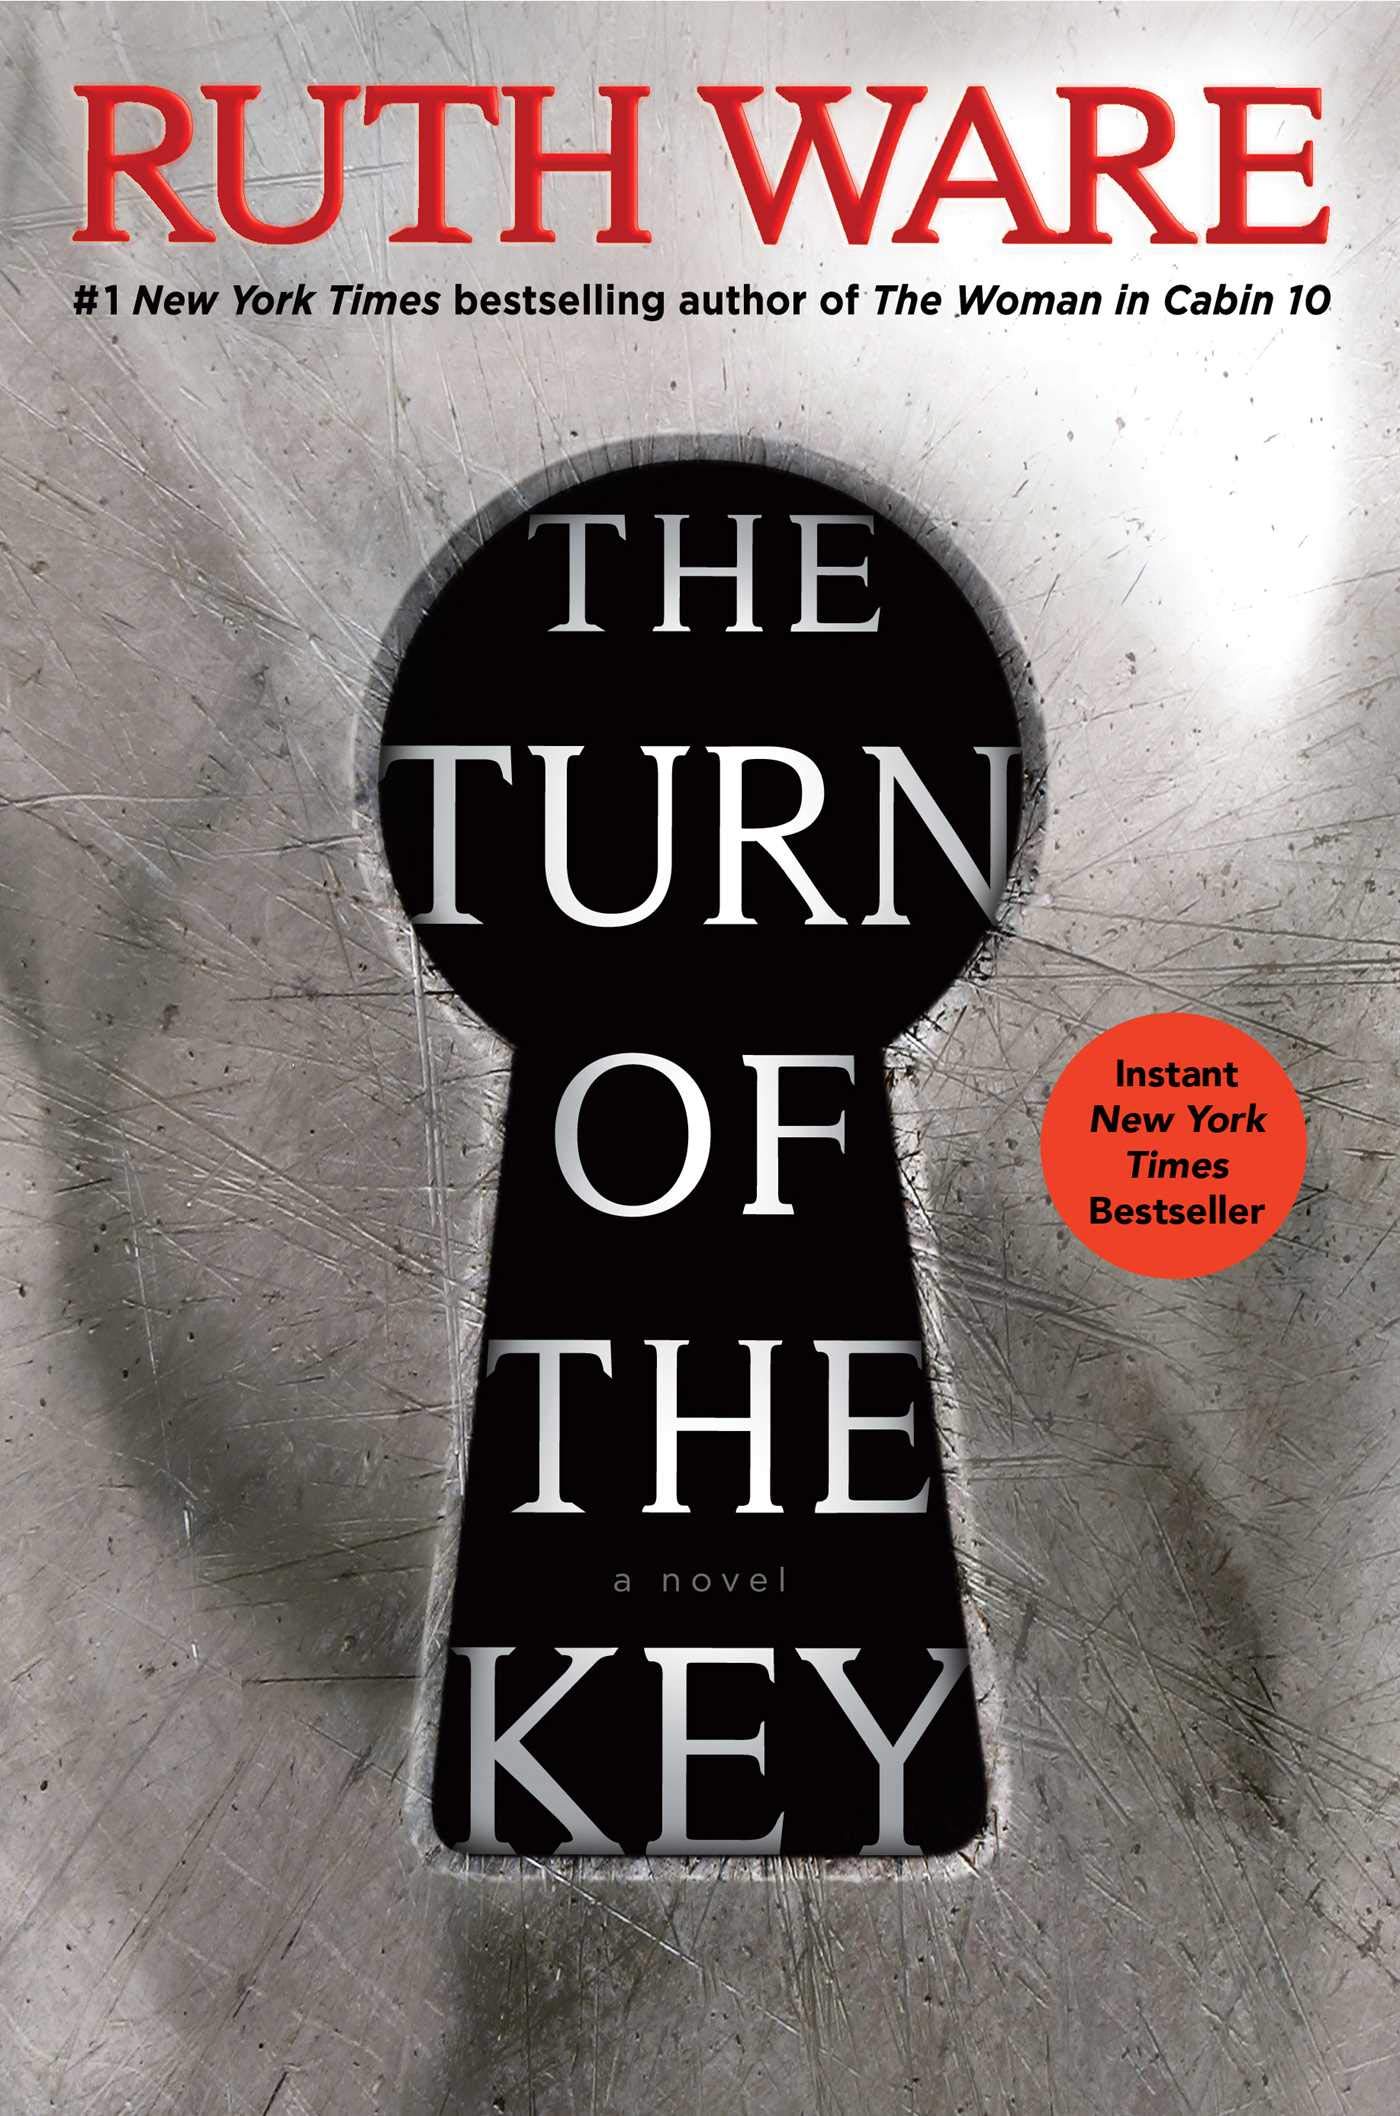 the turn of the key by ruth ware book review